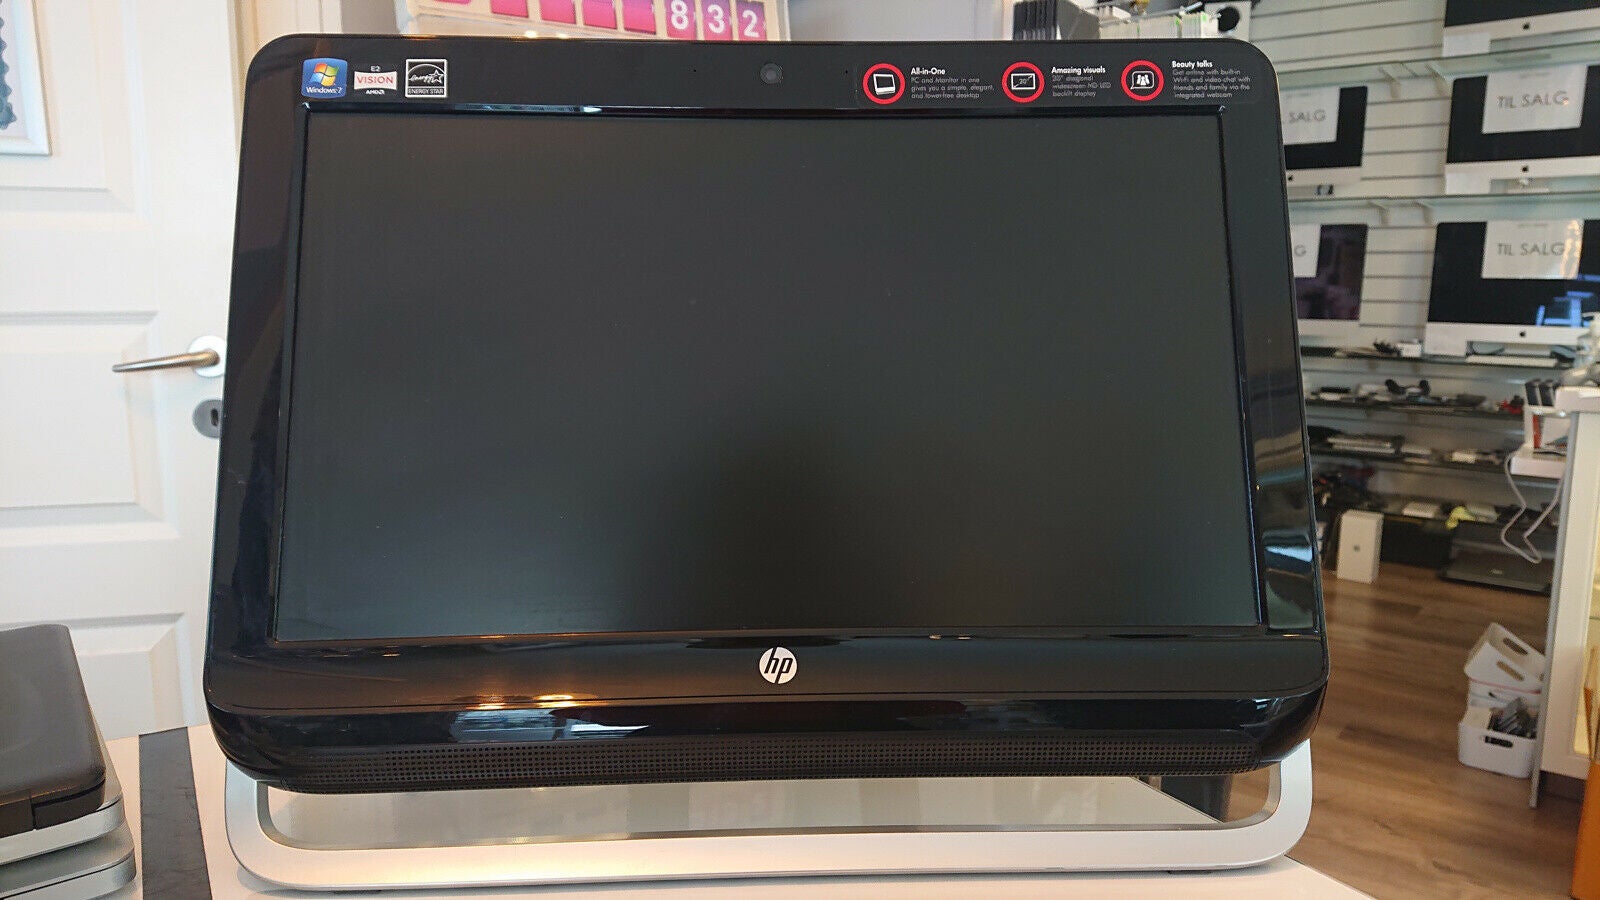 HP Omni 120 All-In-One-PC-Series stationær comp...